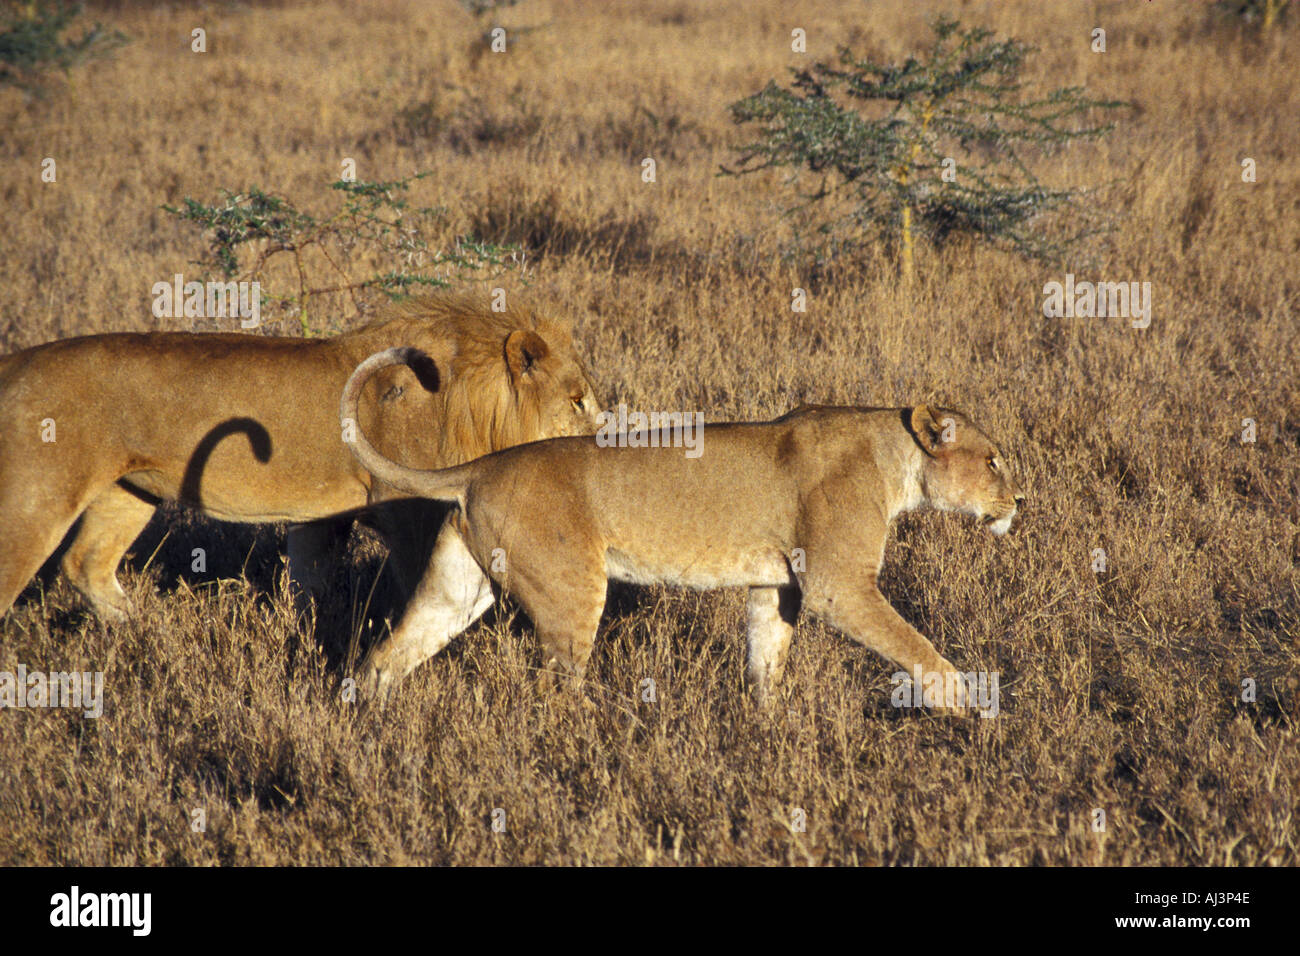 Lions in East Africa in Mating Season Stock Photo